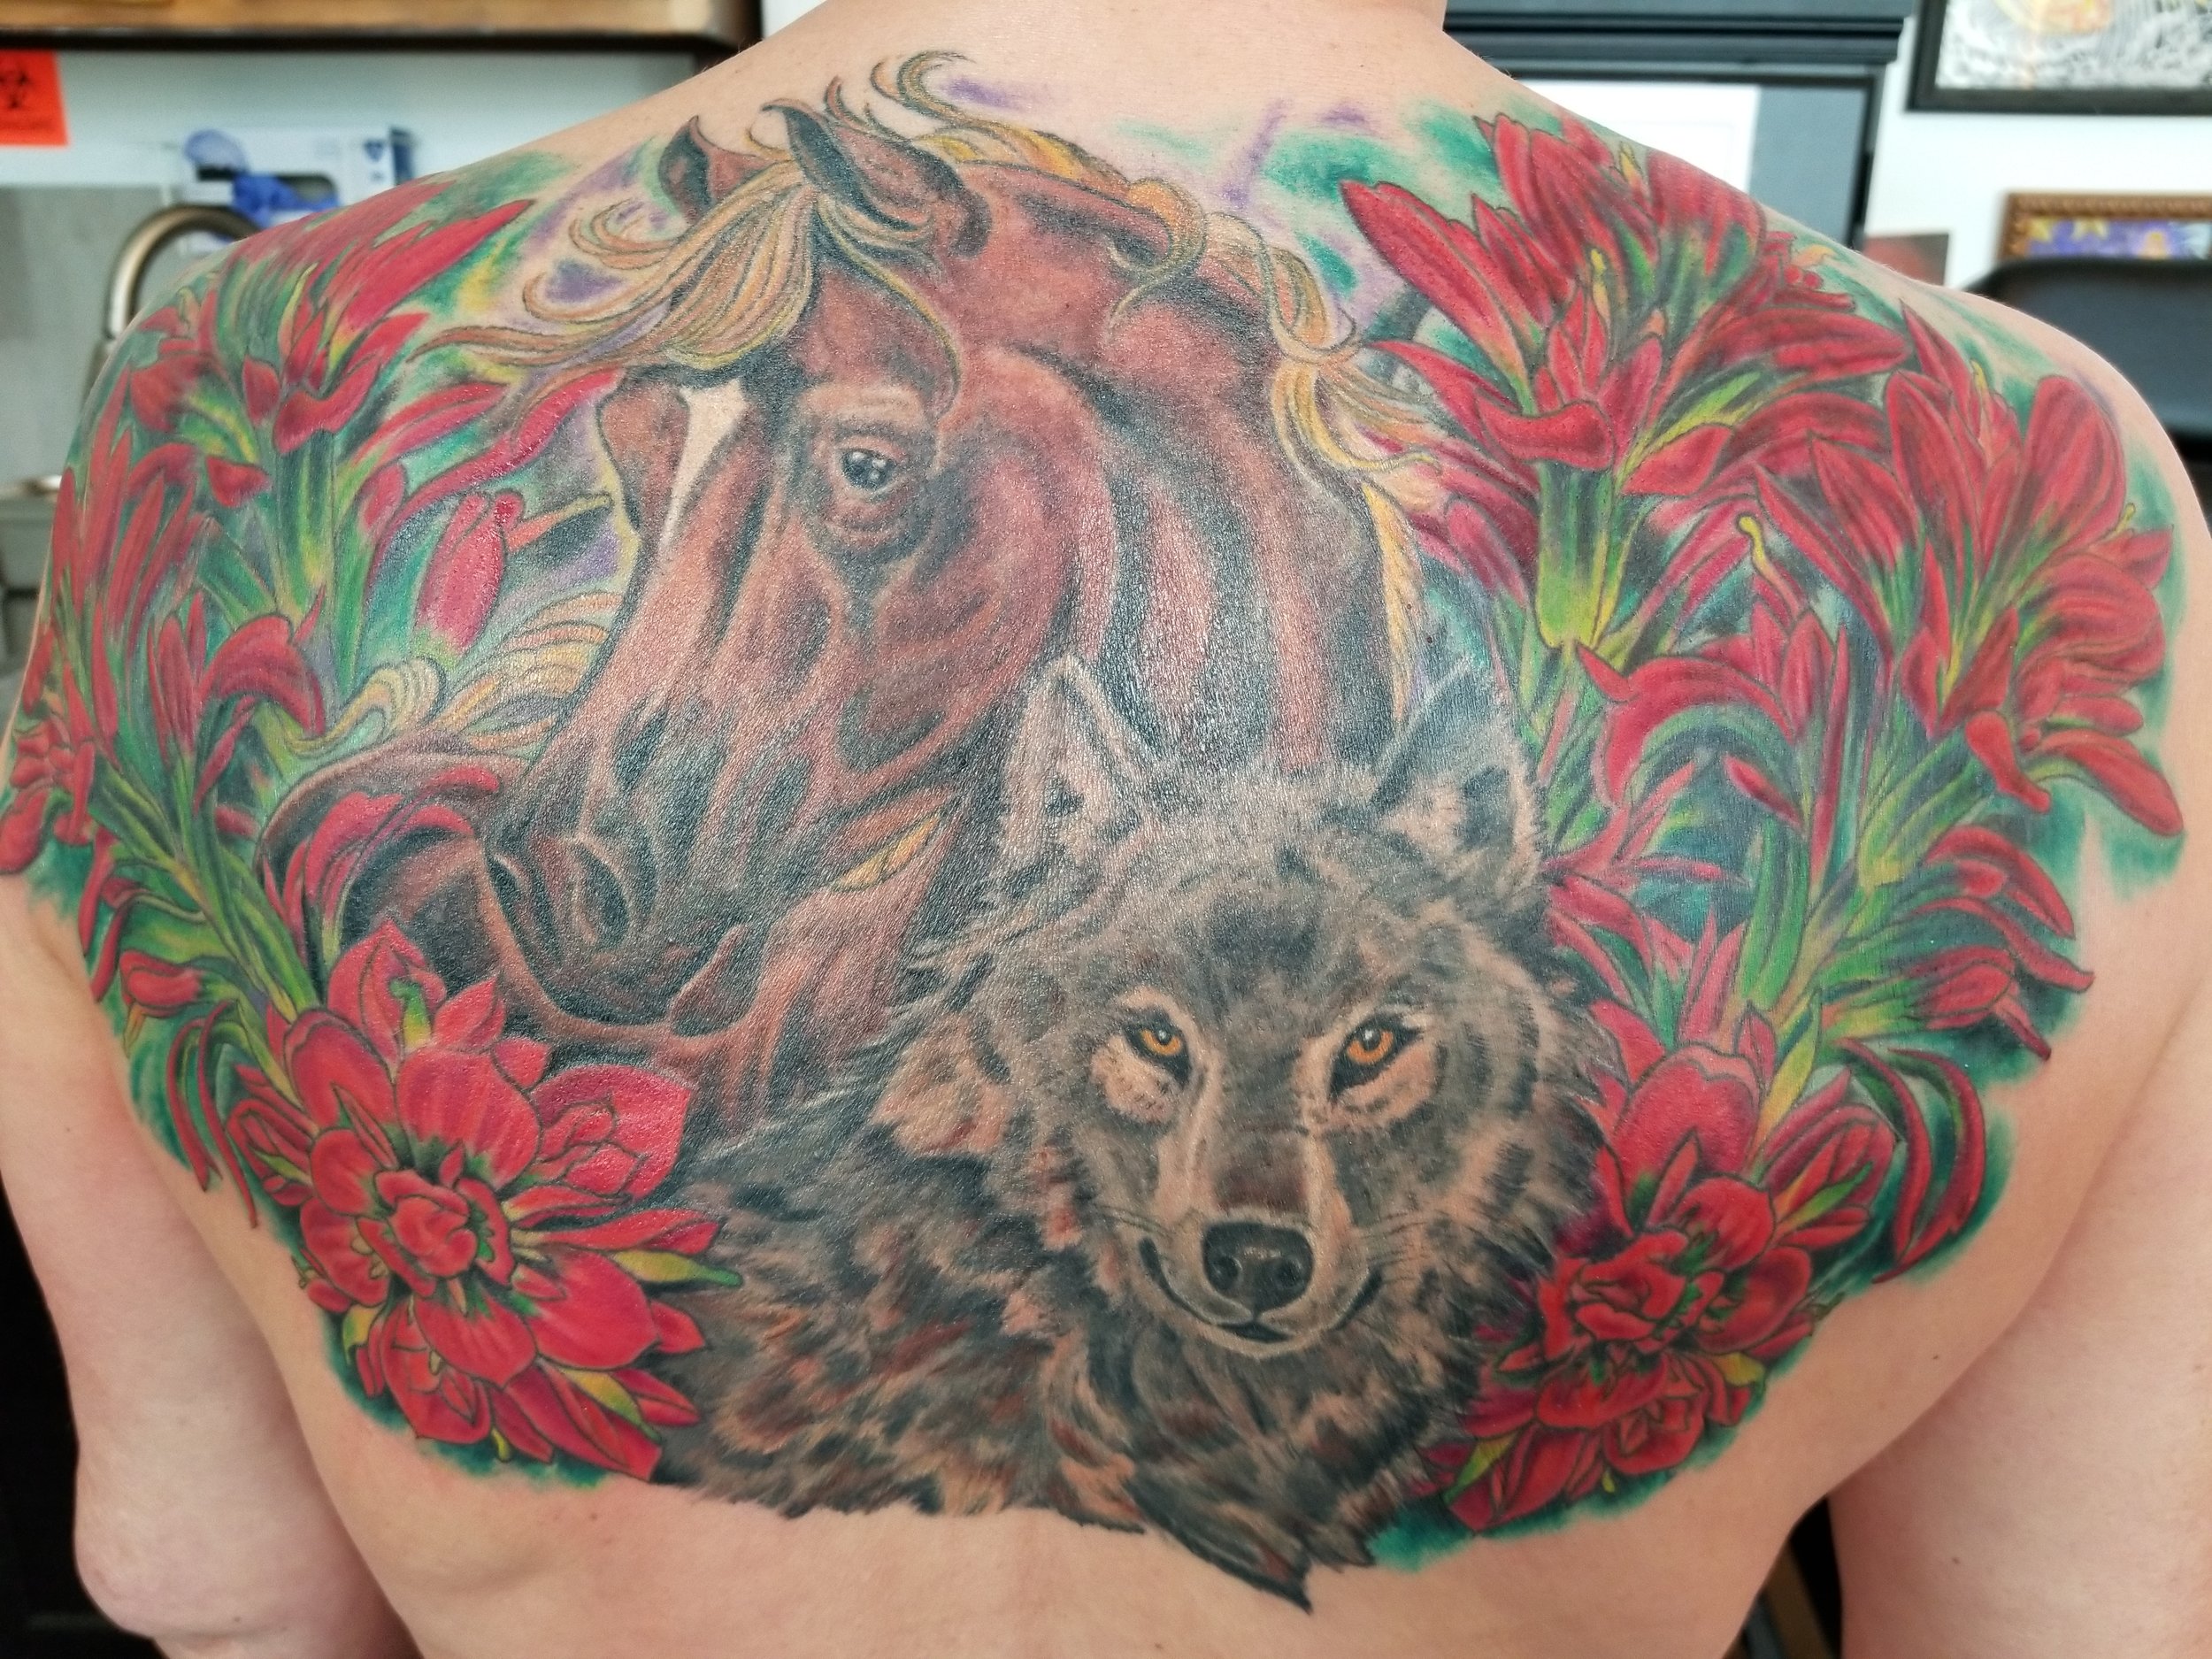 Horse, wolf and Indian paintbrush